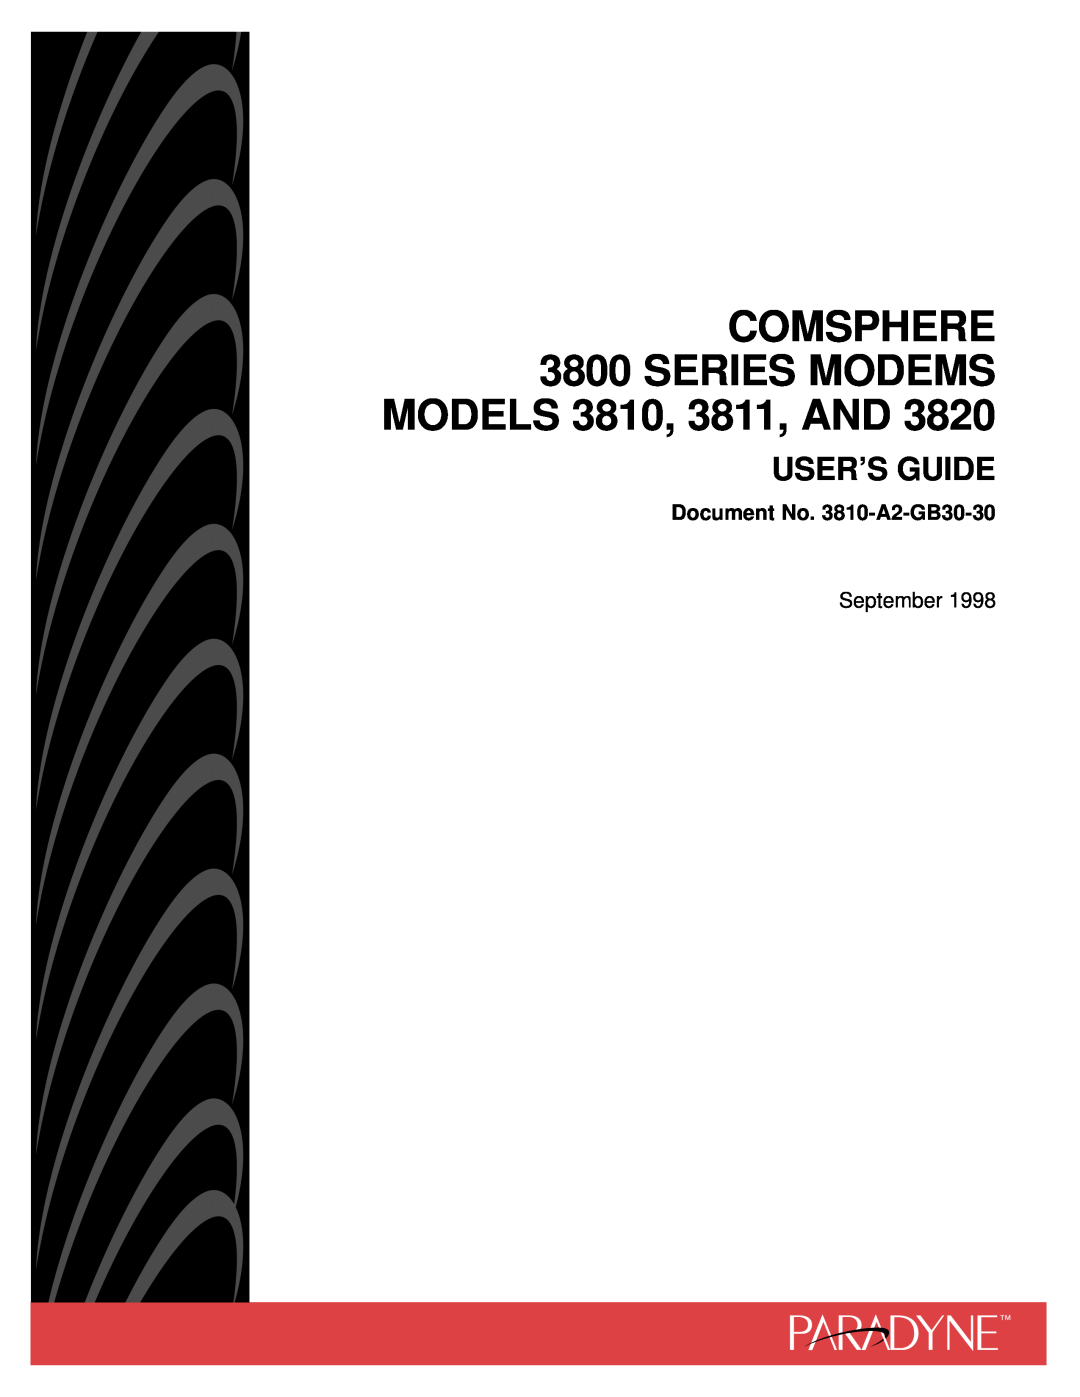 Paradyne COMSPHERE 3800 SERIES MODEMS MODELS 3810, 3811, AND, User’S Guide, Document No. 3810-A2-GB30-30, September 